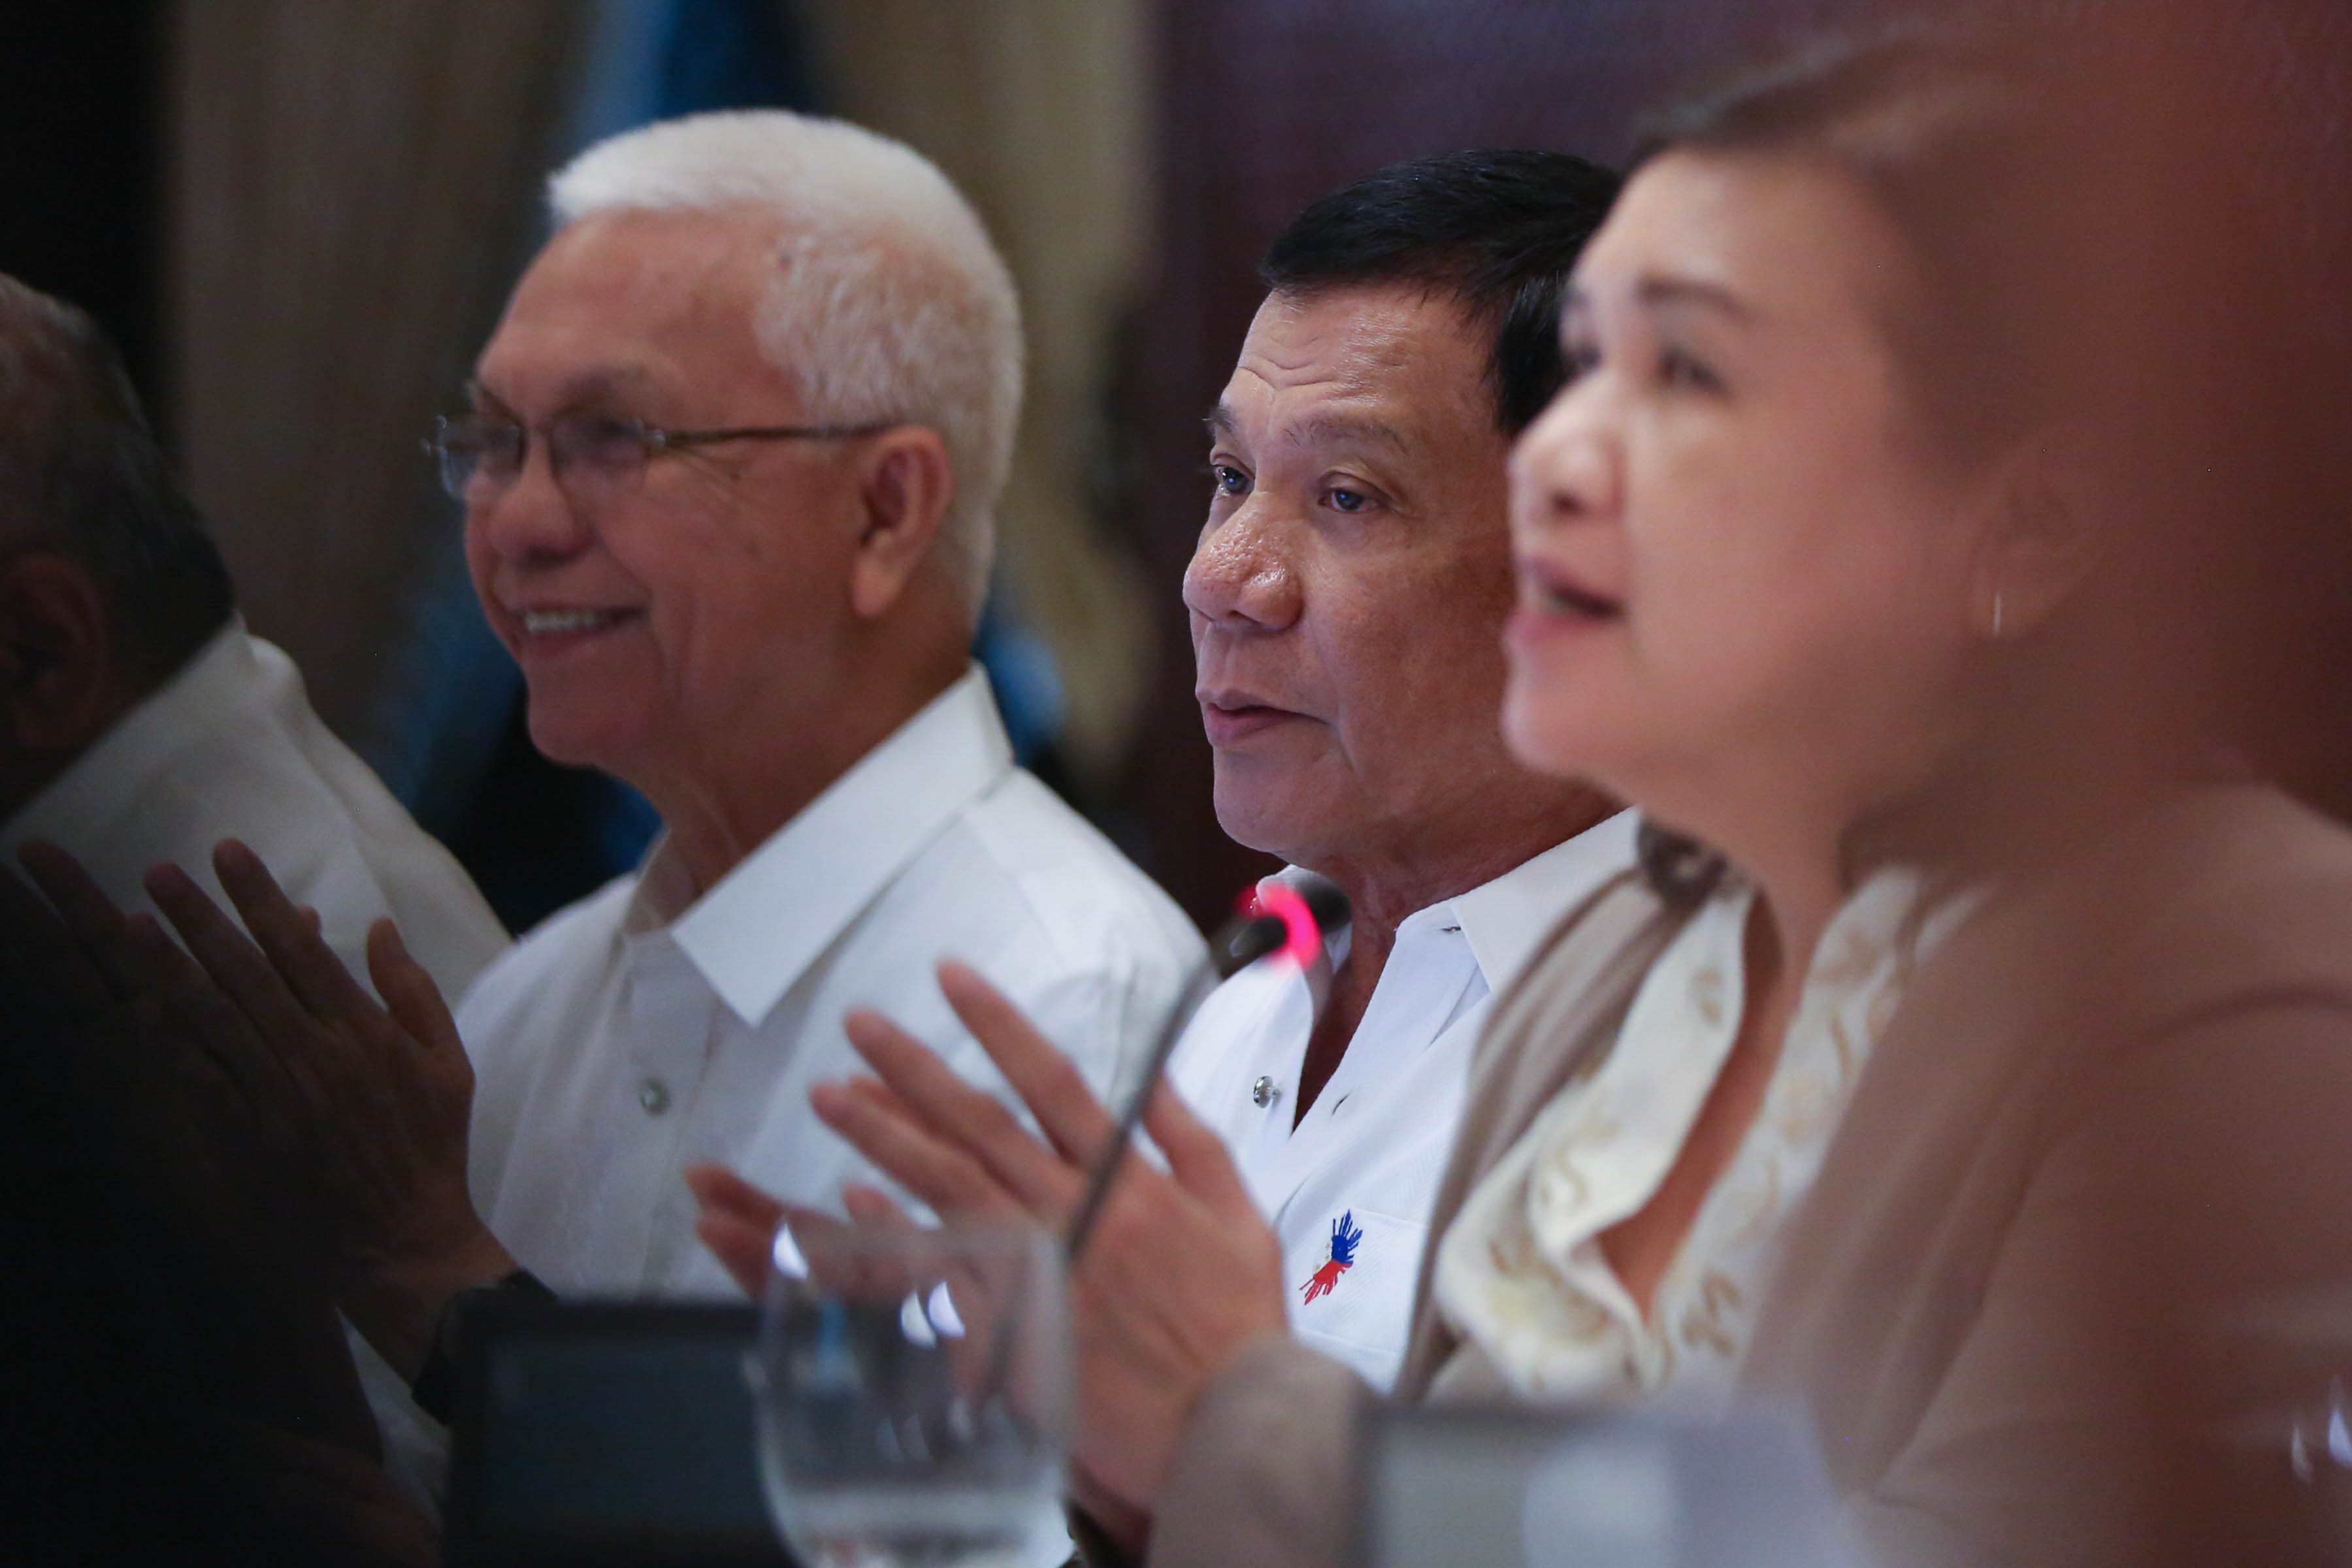 COLORFUL CABINET. President Duterte sits between Leftist Cabinet members, Cabinet Secretary Jun Evasco and NAPC chairperson Liza Maza during a NAPC meeting in the Palace. Presidential photo 